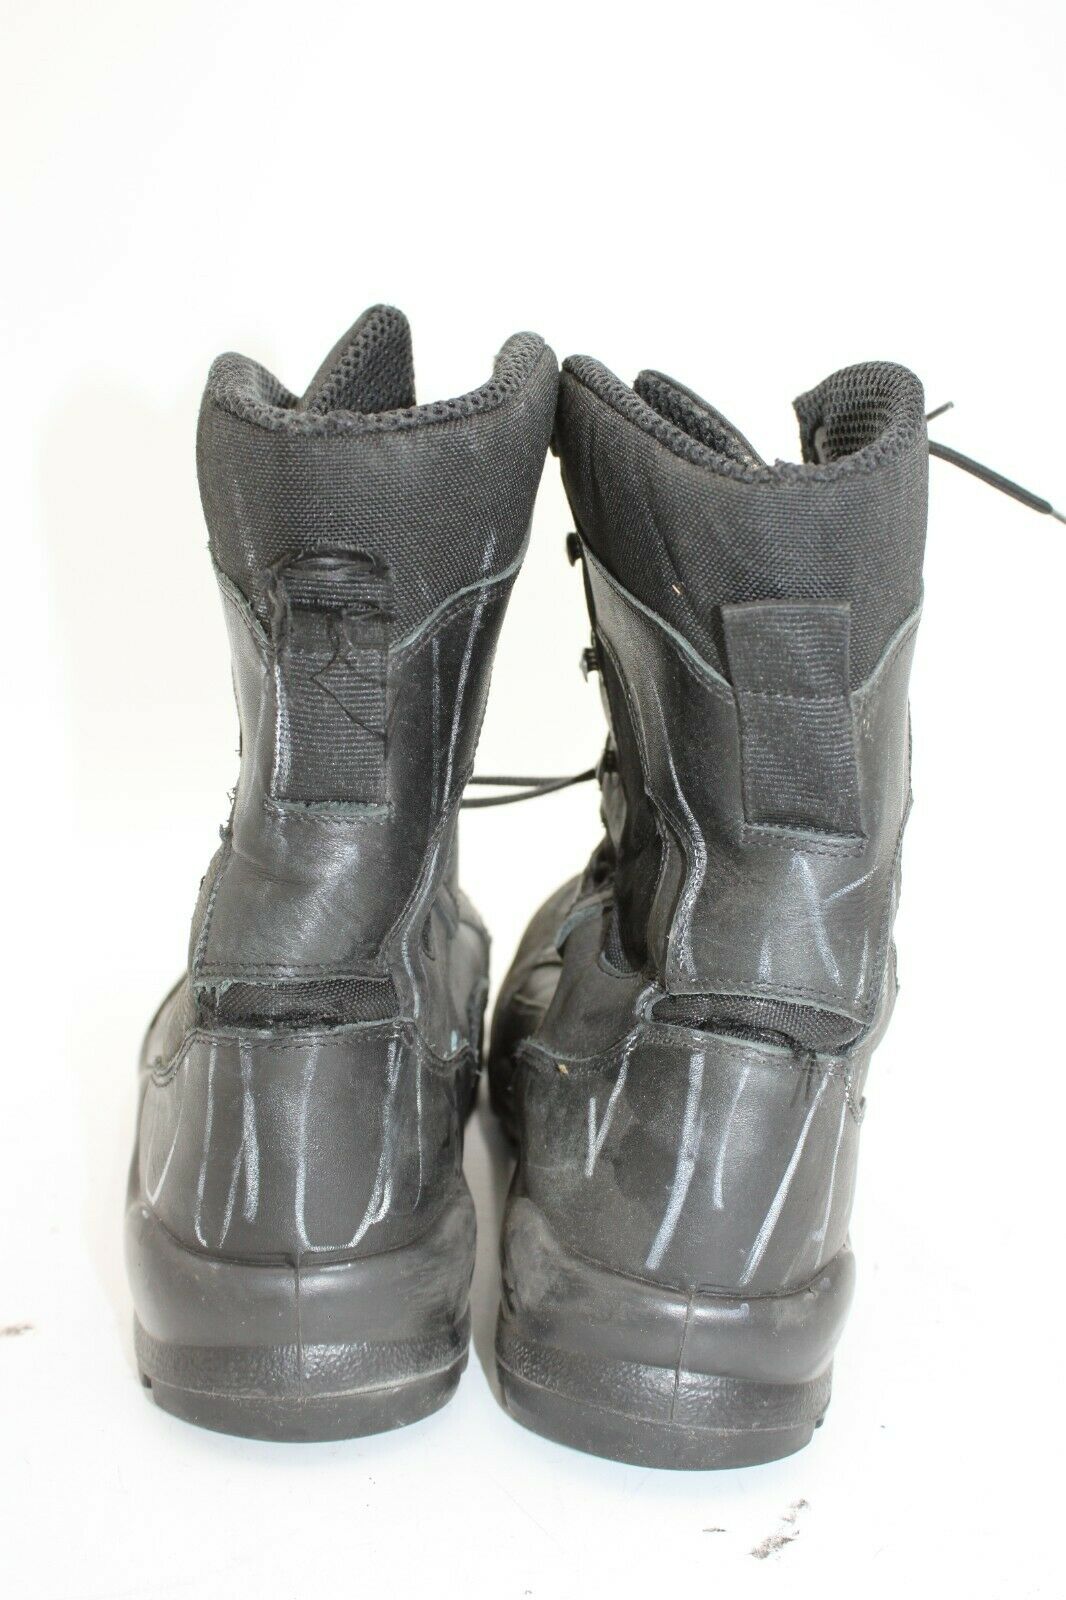 Austrian Military Jungle Combat Boots Stumpp & Baier Lightweight Used Size 10 US (ASB310)